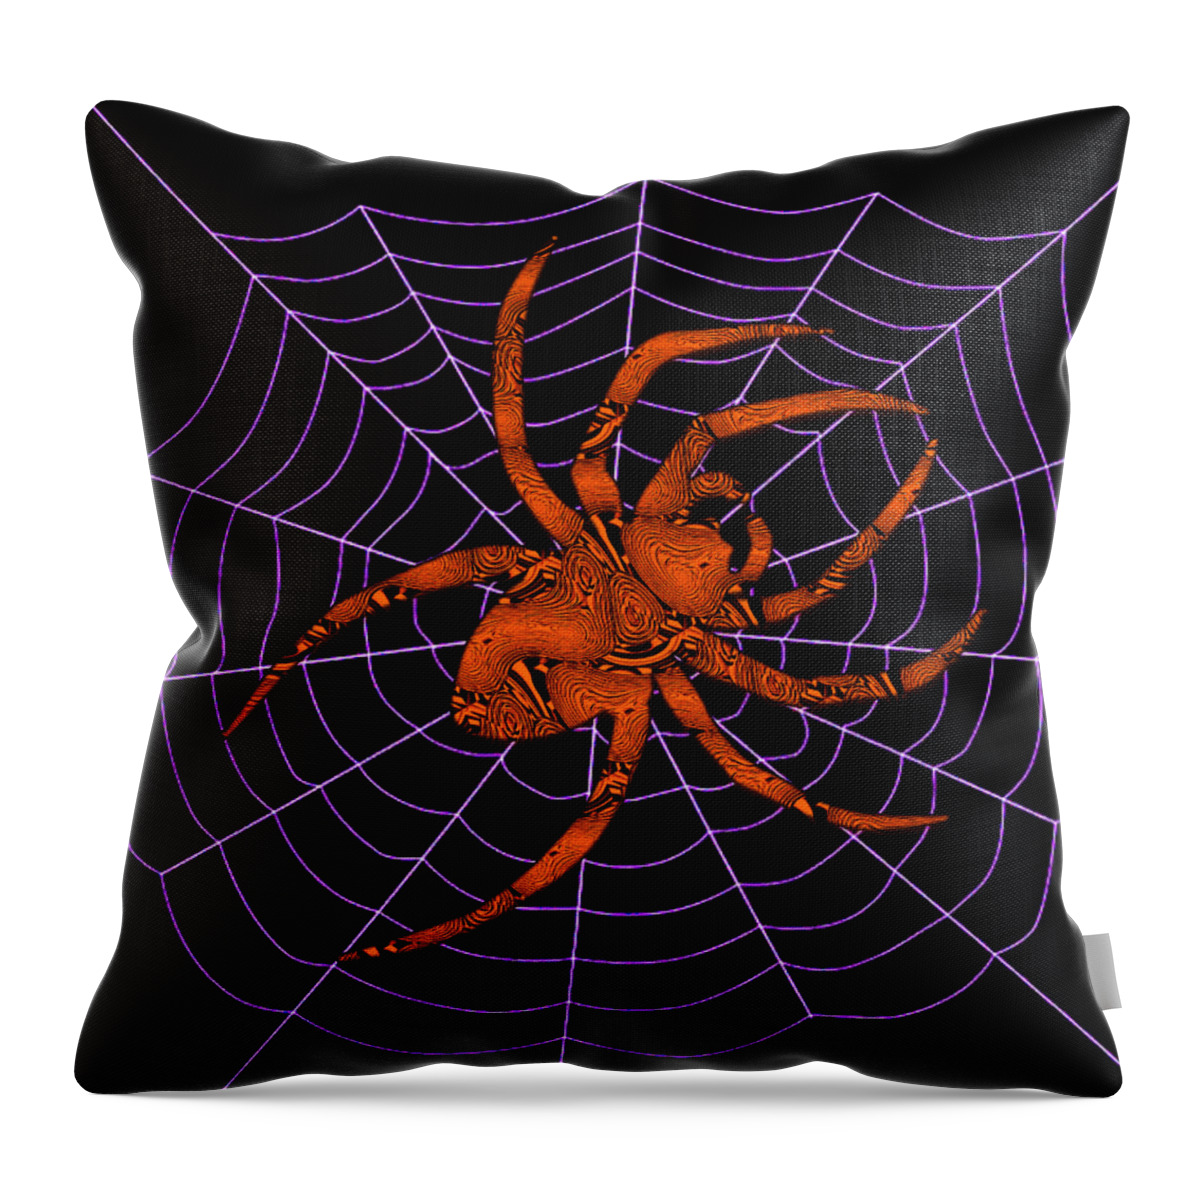 Spider Throw Pillow featuring the digital art Spider Art by Ronald Mills